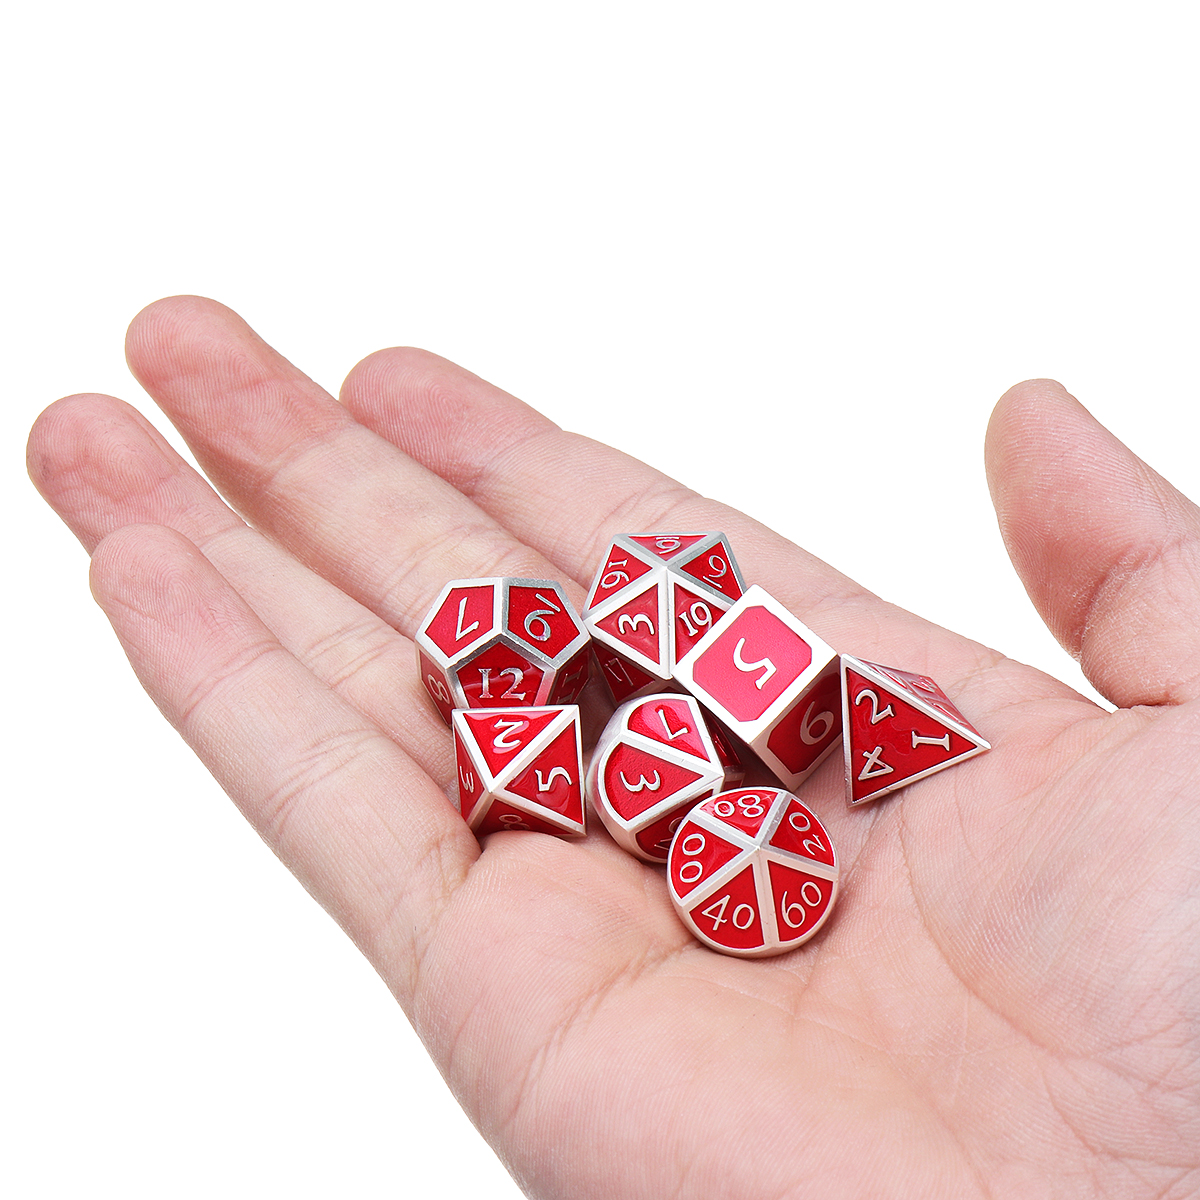 Red-Antique-Color-Solid-Metal-Polyhedral-Dices-Role-Playing-RPG-Gadget-7-Dice-Set-With-Bag-1425967-5